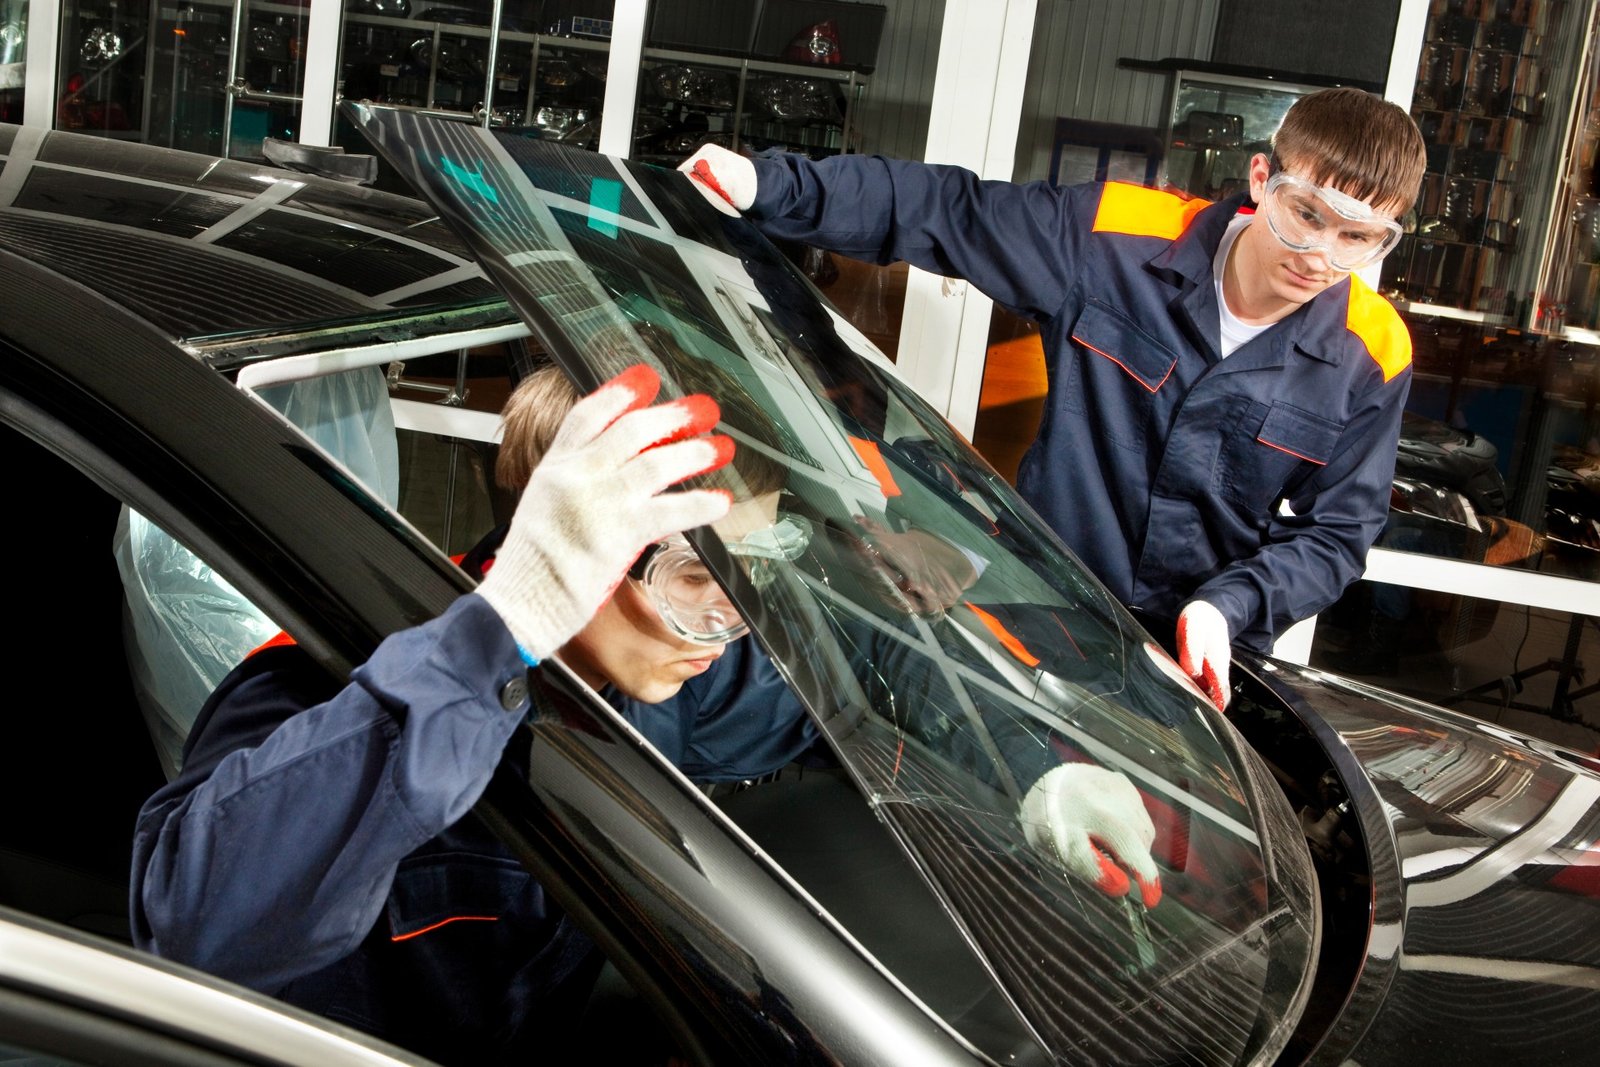 Windshield Repair Simi Valley CA - Get Auto Glass Repair and Replacement Services with Thousand Oaks Auto Glass Repair